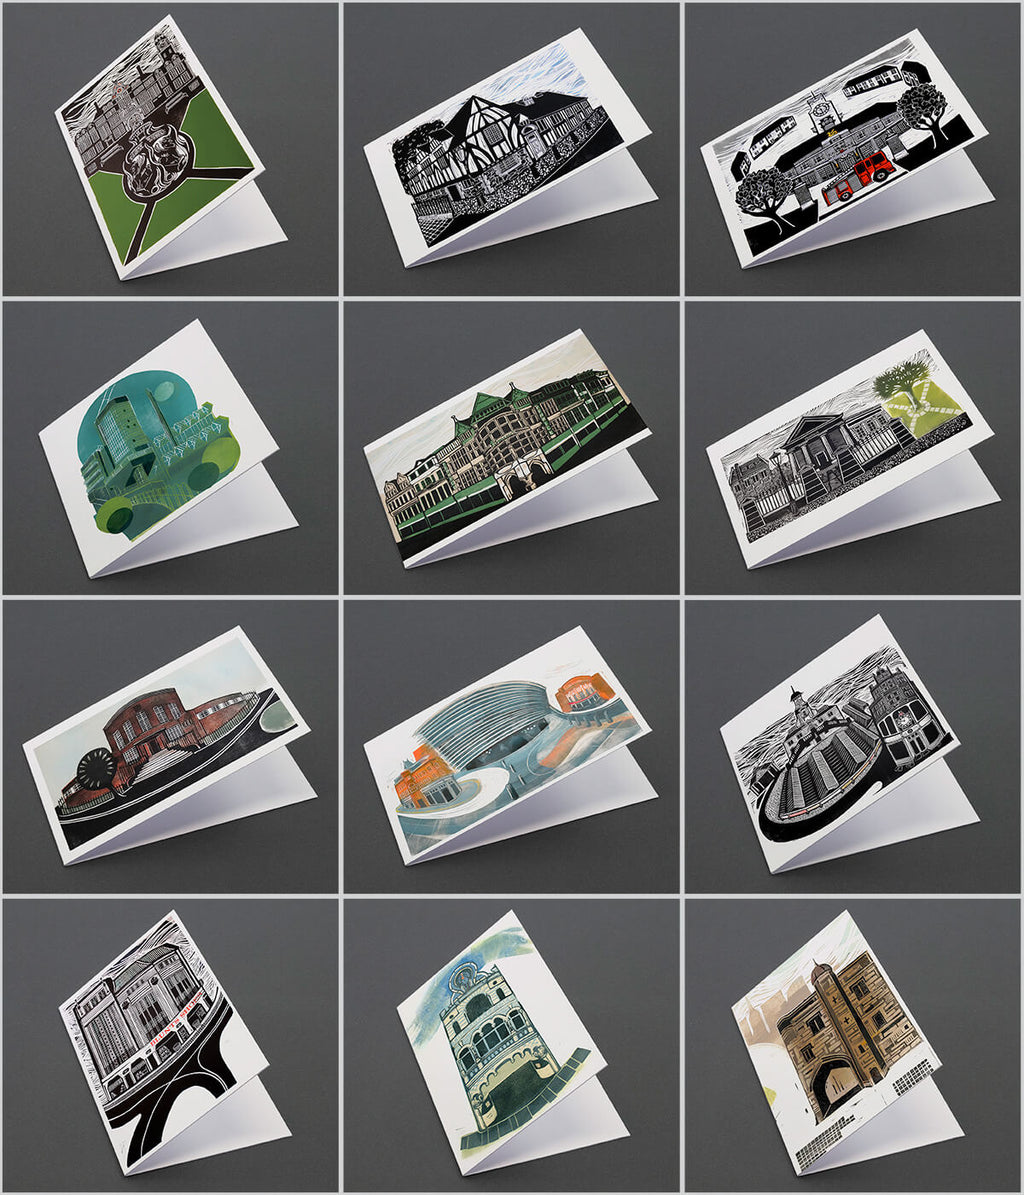 Leicester Landmarks, a pack of linocut greeting cards by Sarah Kirby